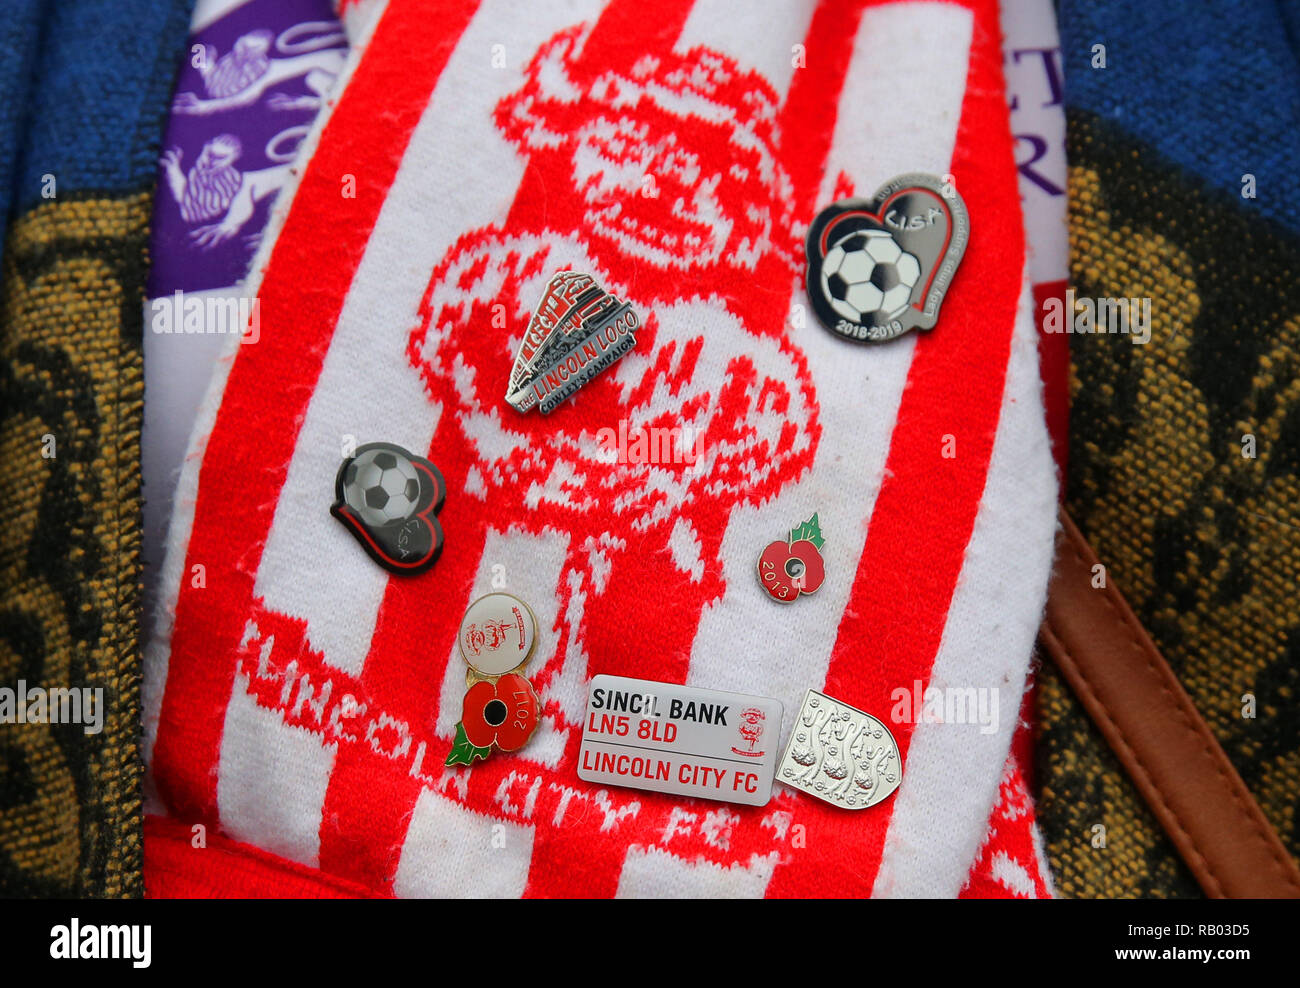 LINCOLN CITY SCALF, badges, BROCHES FC Everton V LINCOLN CITY, FC Everton V LINCOLN CITY, unis en FA CUP, 2019 Banque D'Images